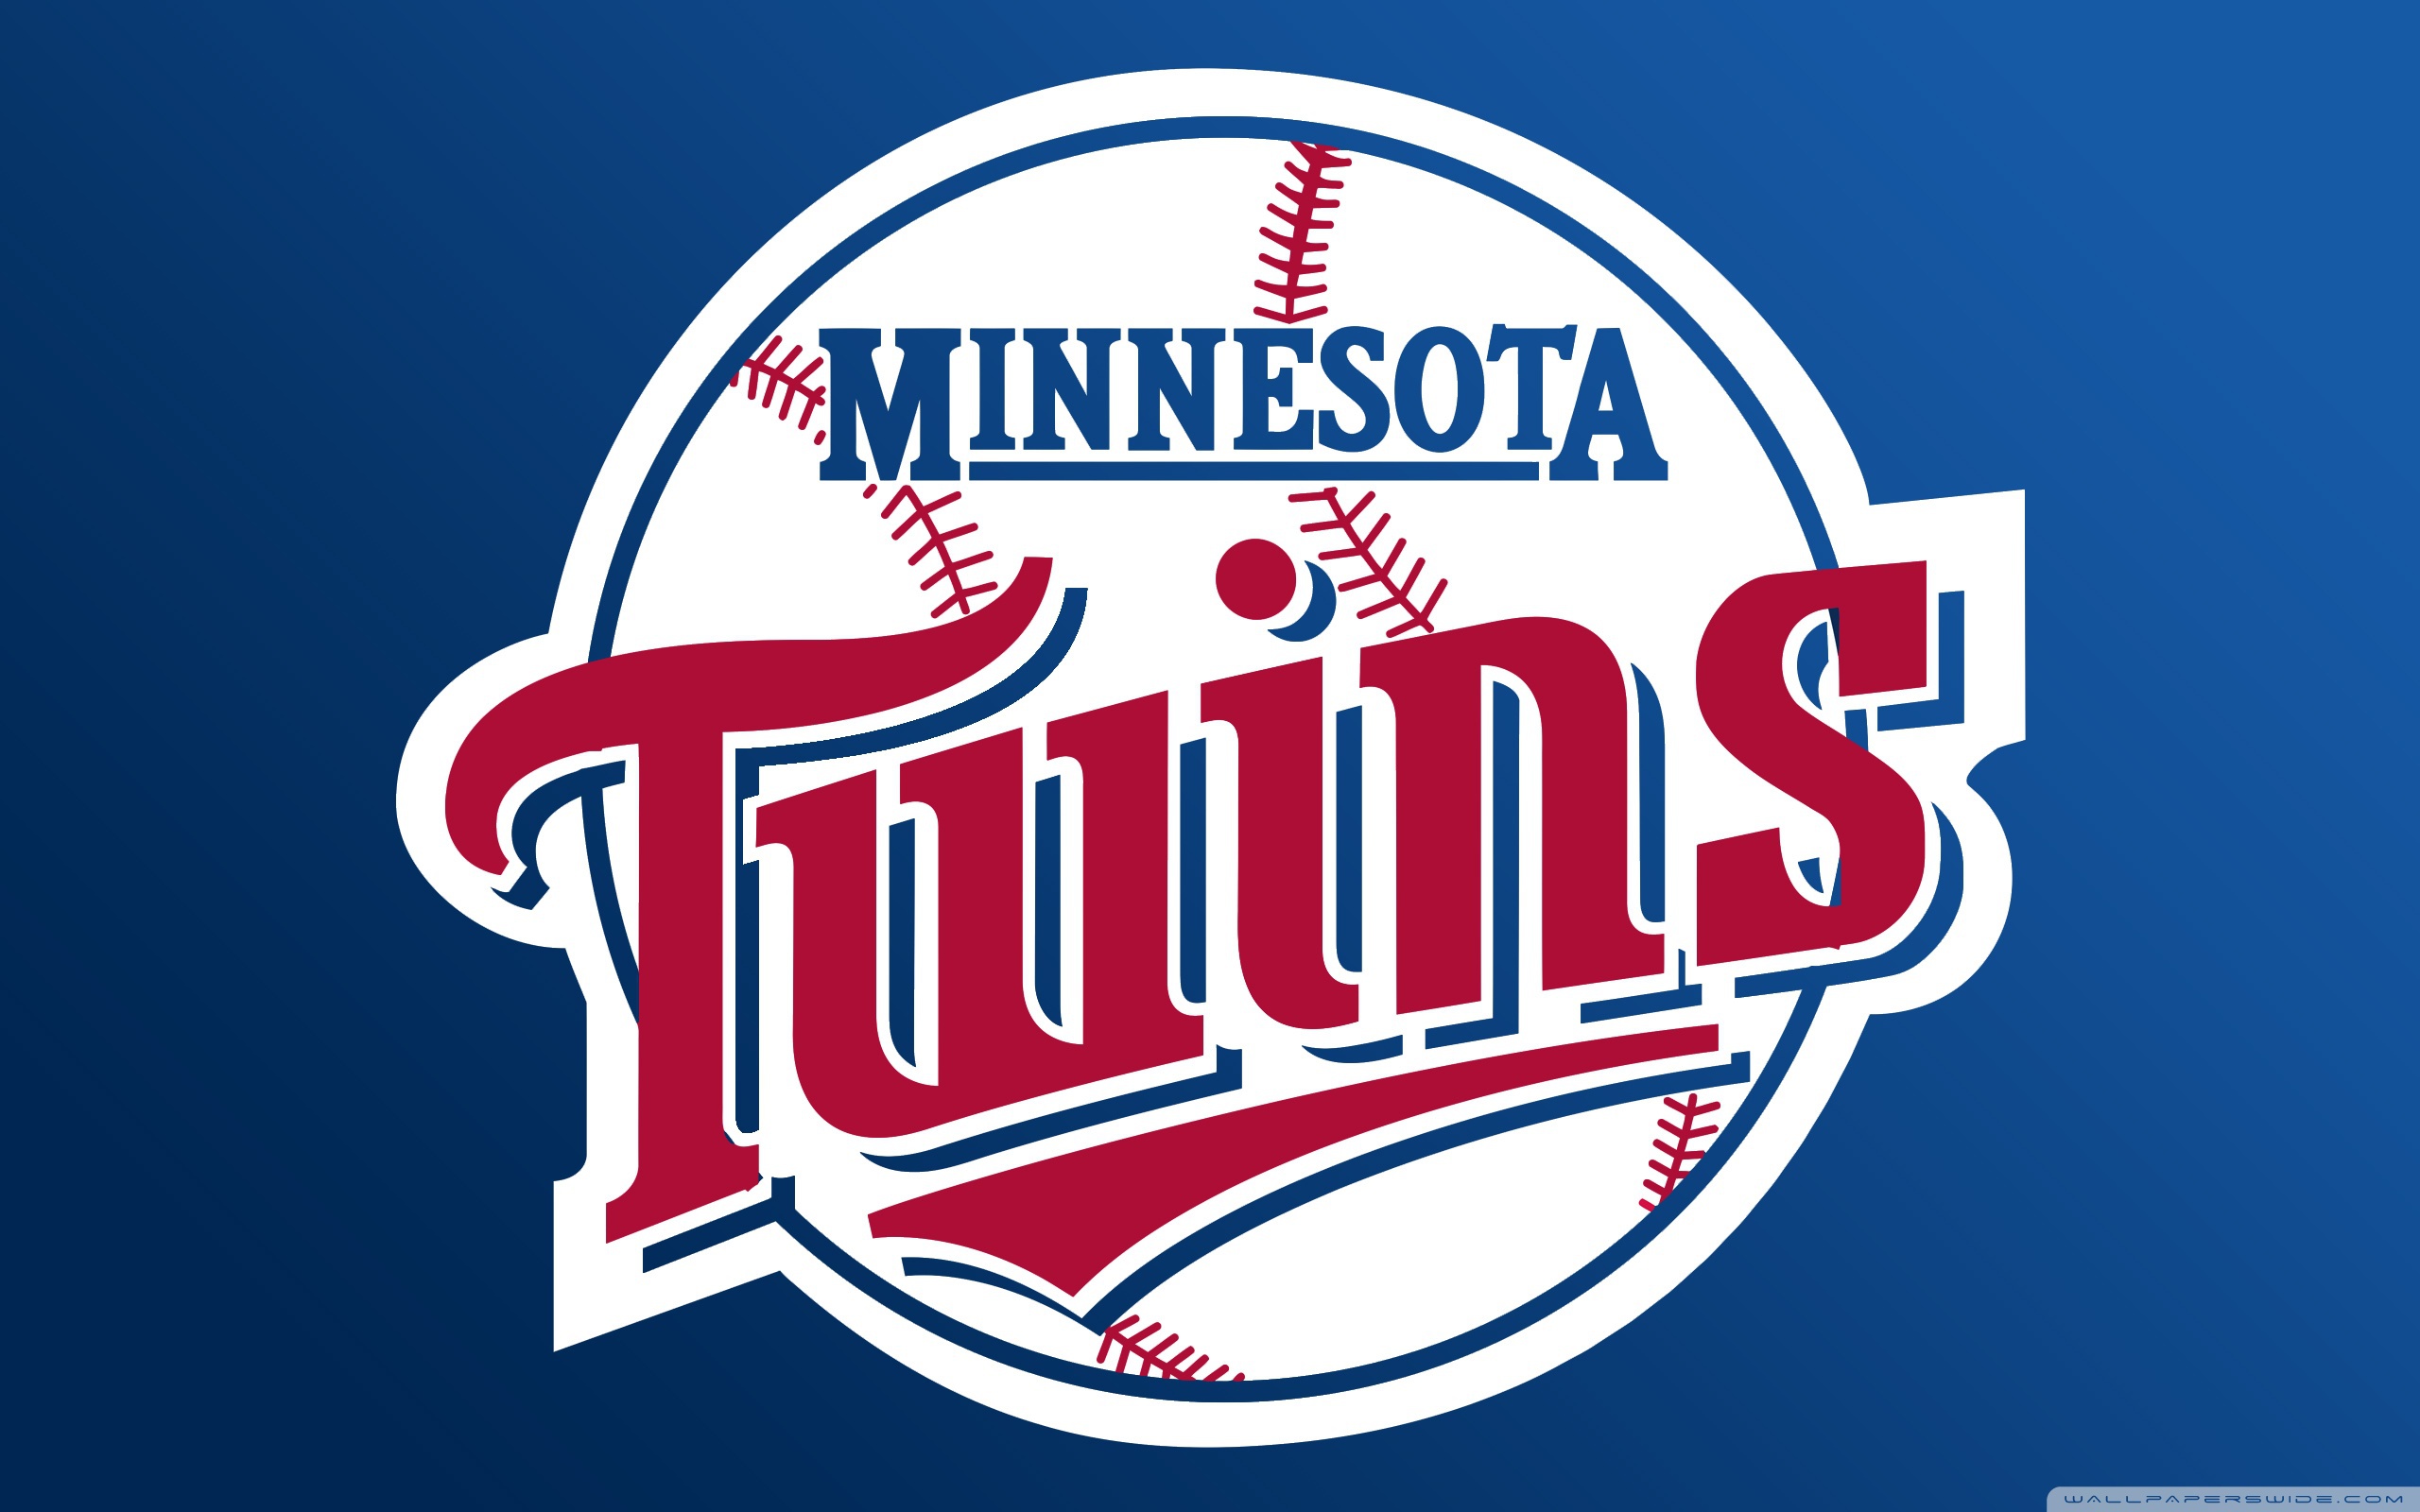 Minnesota Twins logo Club wallpapers and images   wallpapers pictures